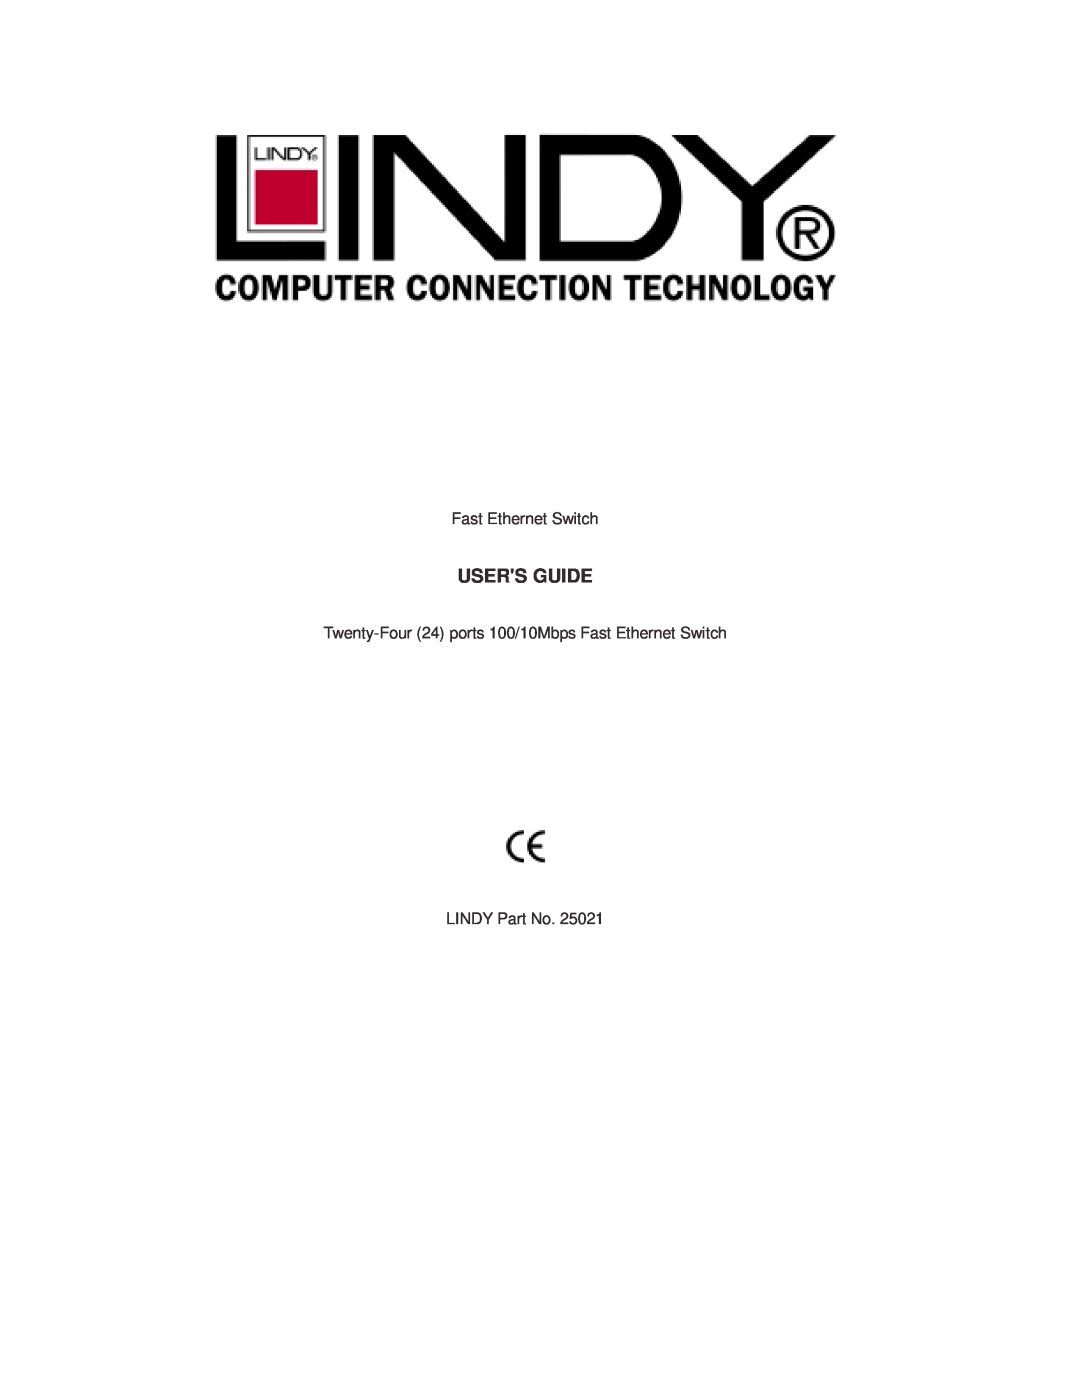 Lindy 25021 manual Users Guide, Twenty-Four 24 ports 100/10Mbps Fast Ethernet Switch LINDY Part No 